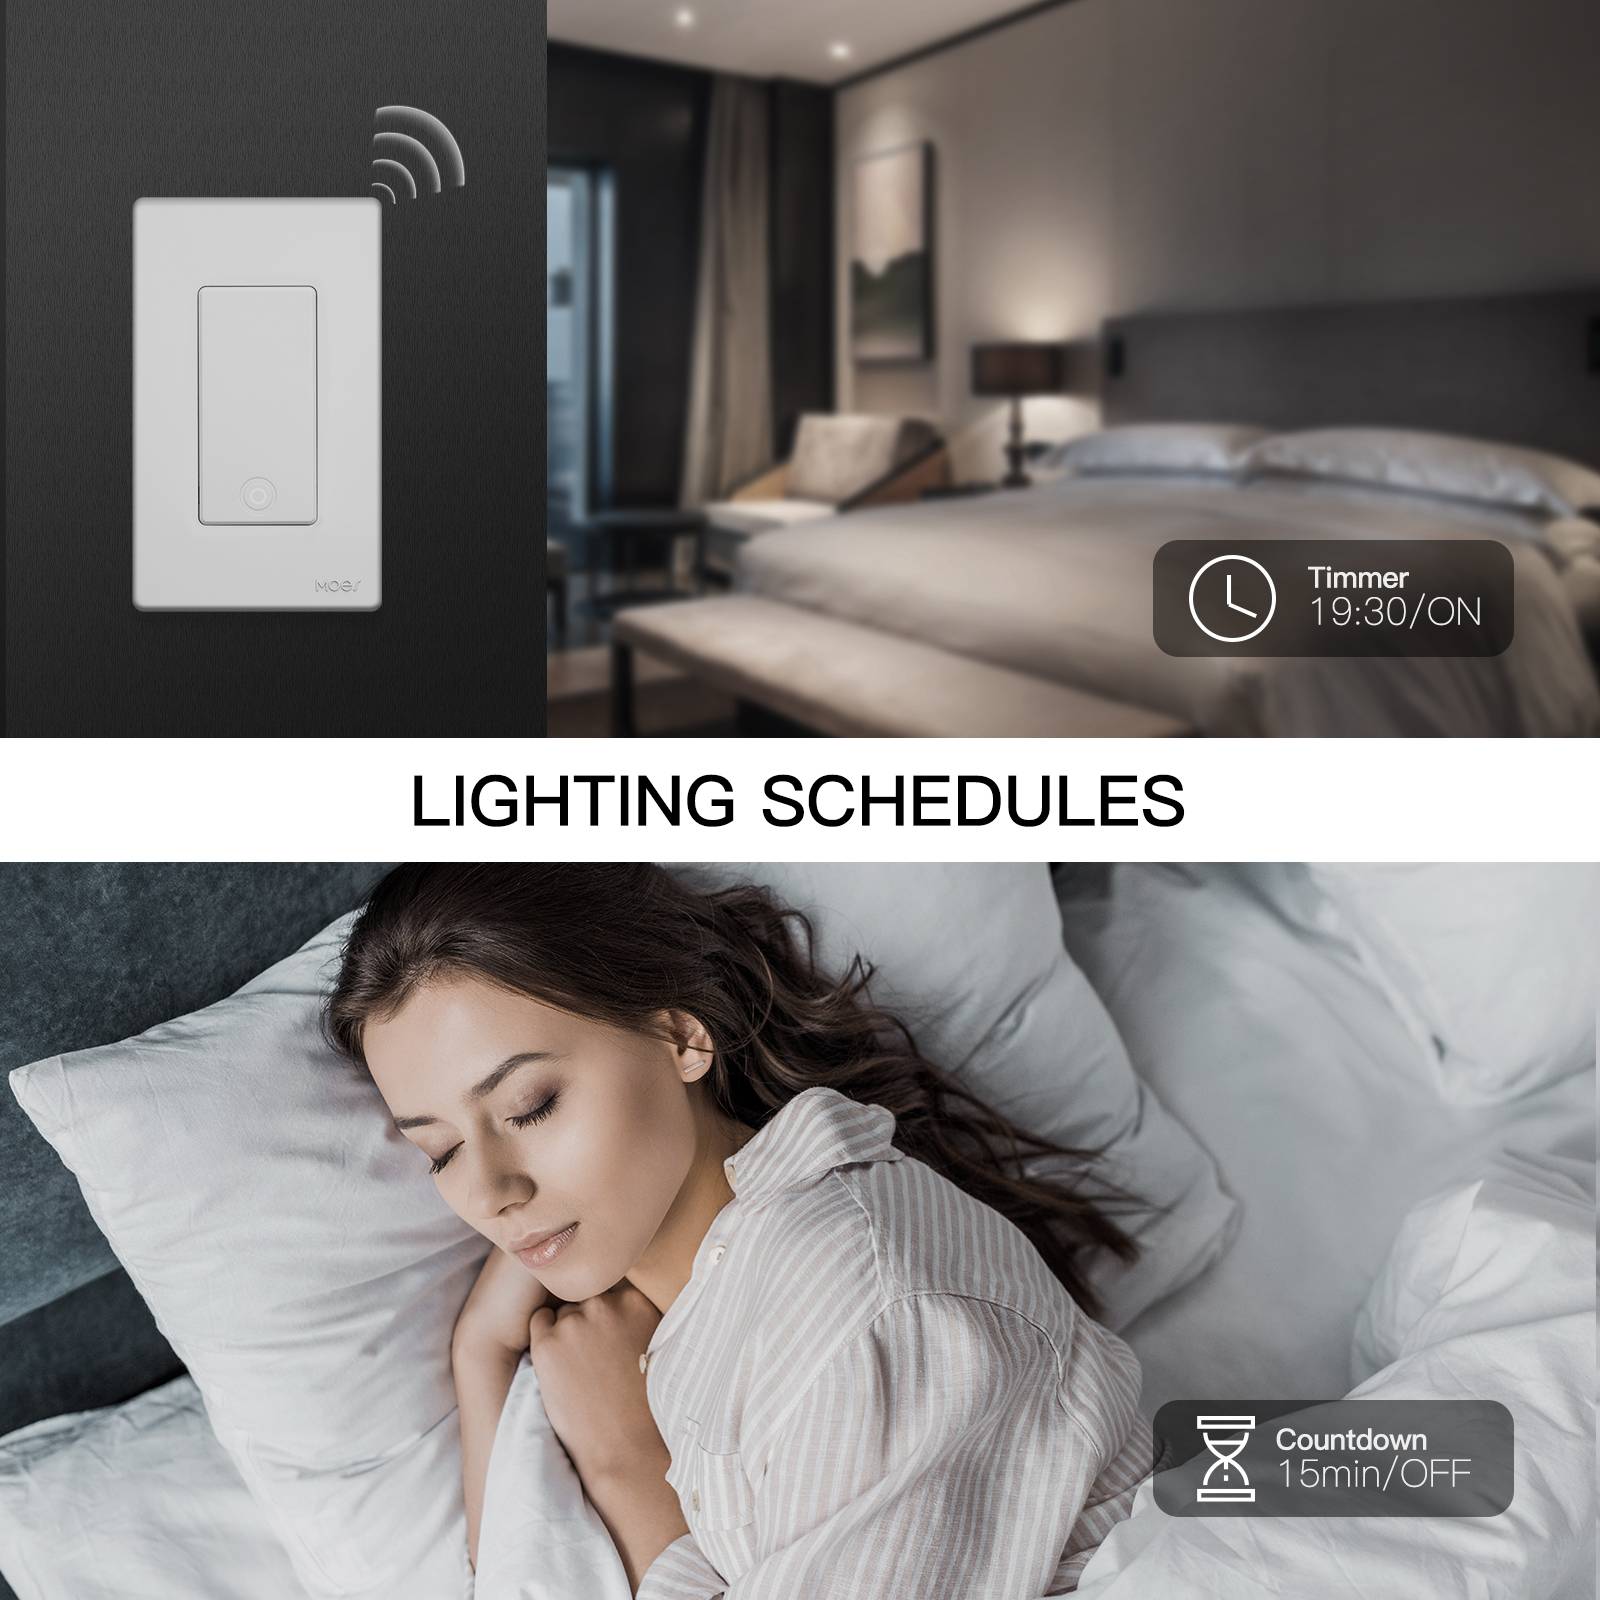 WiFi RF433 Smart Light Switch Black, Touch Light Switch with LED Indicator, US Standard Wall Switch Compatible with Alexa, Google Assistant wow smart